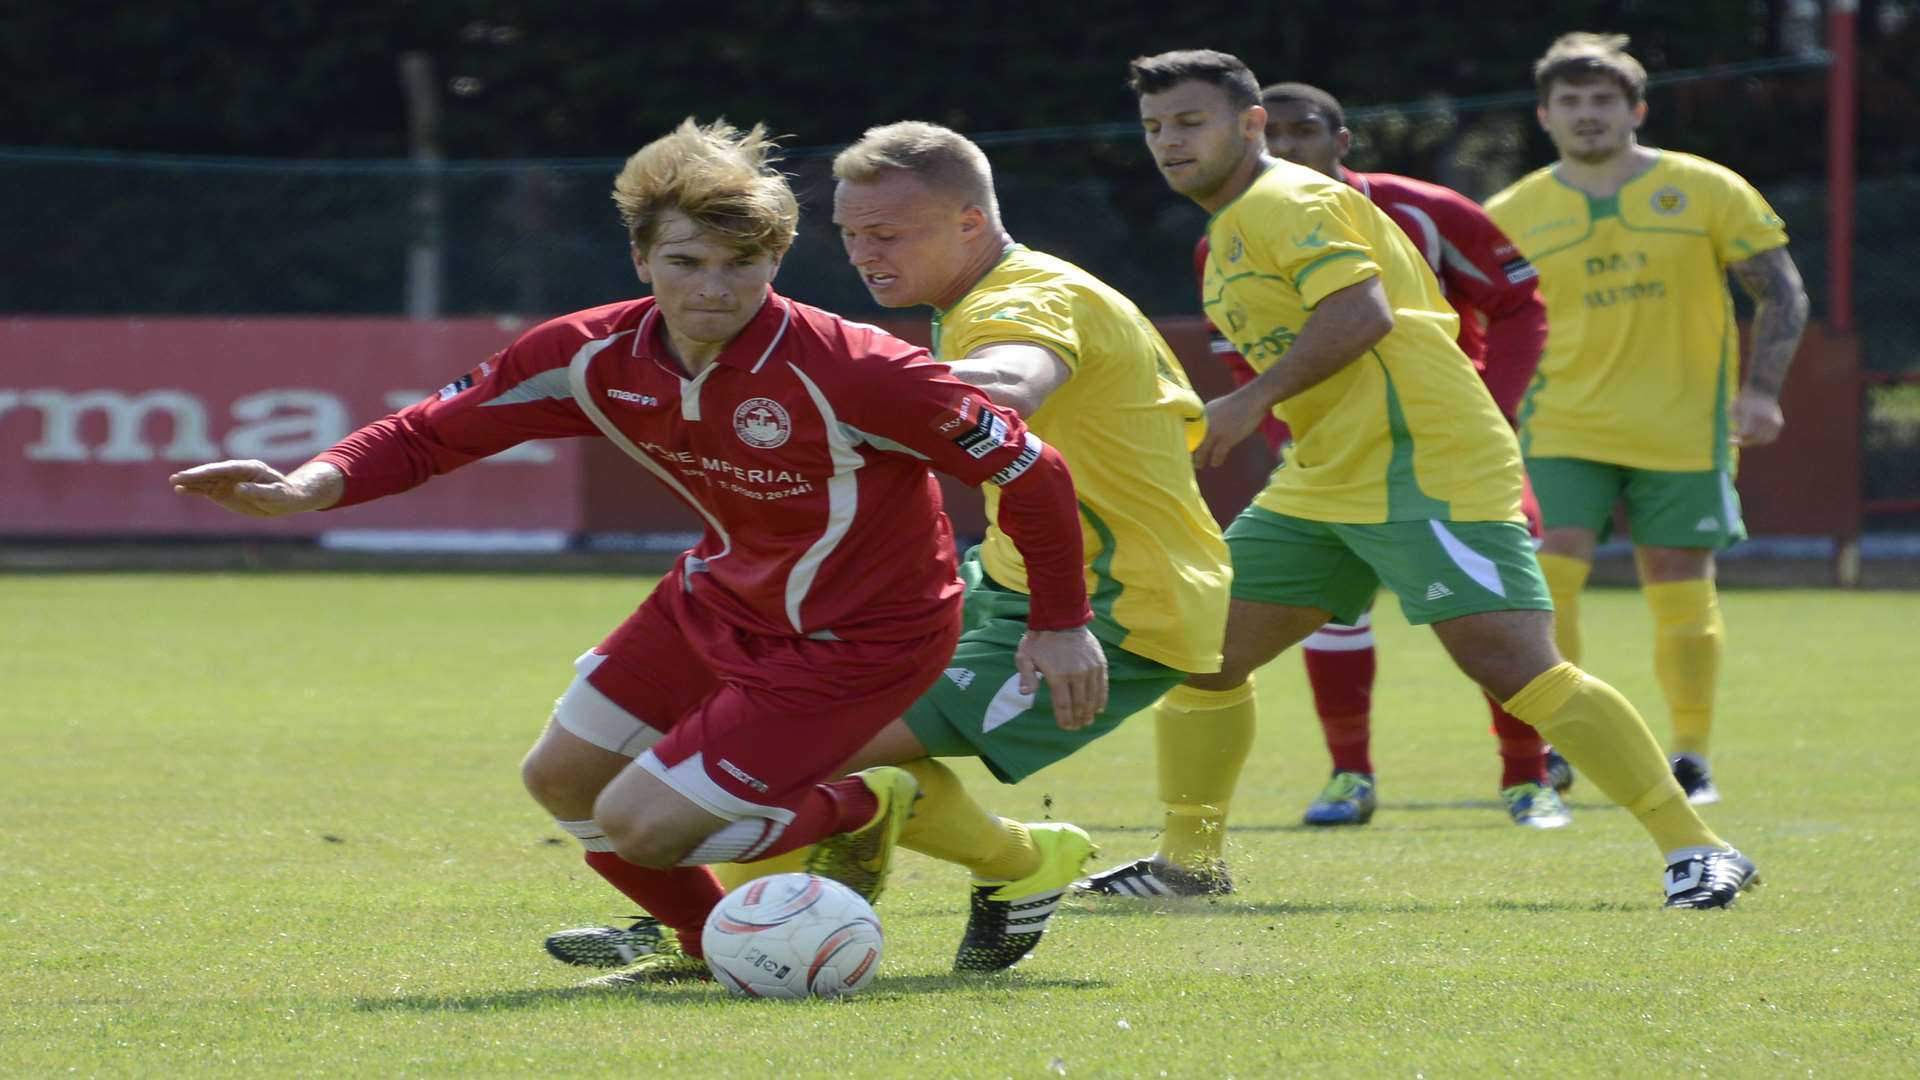 James Morrish in action for Hythe against Ashford during pre-season Picture: Paul Amos